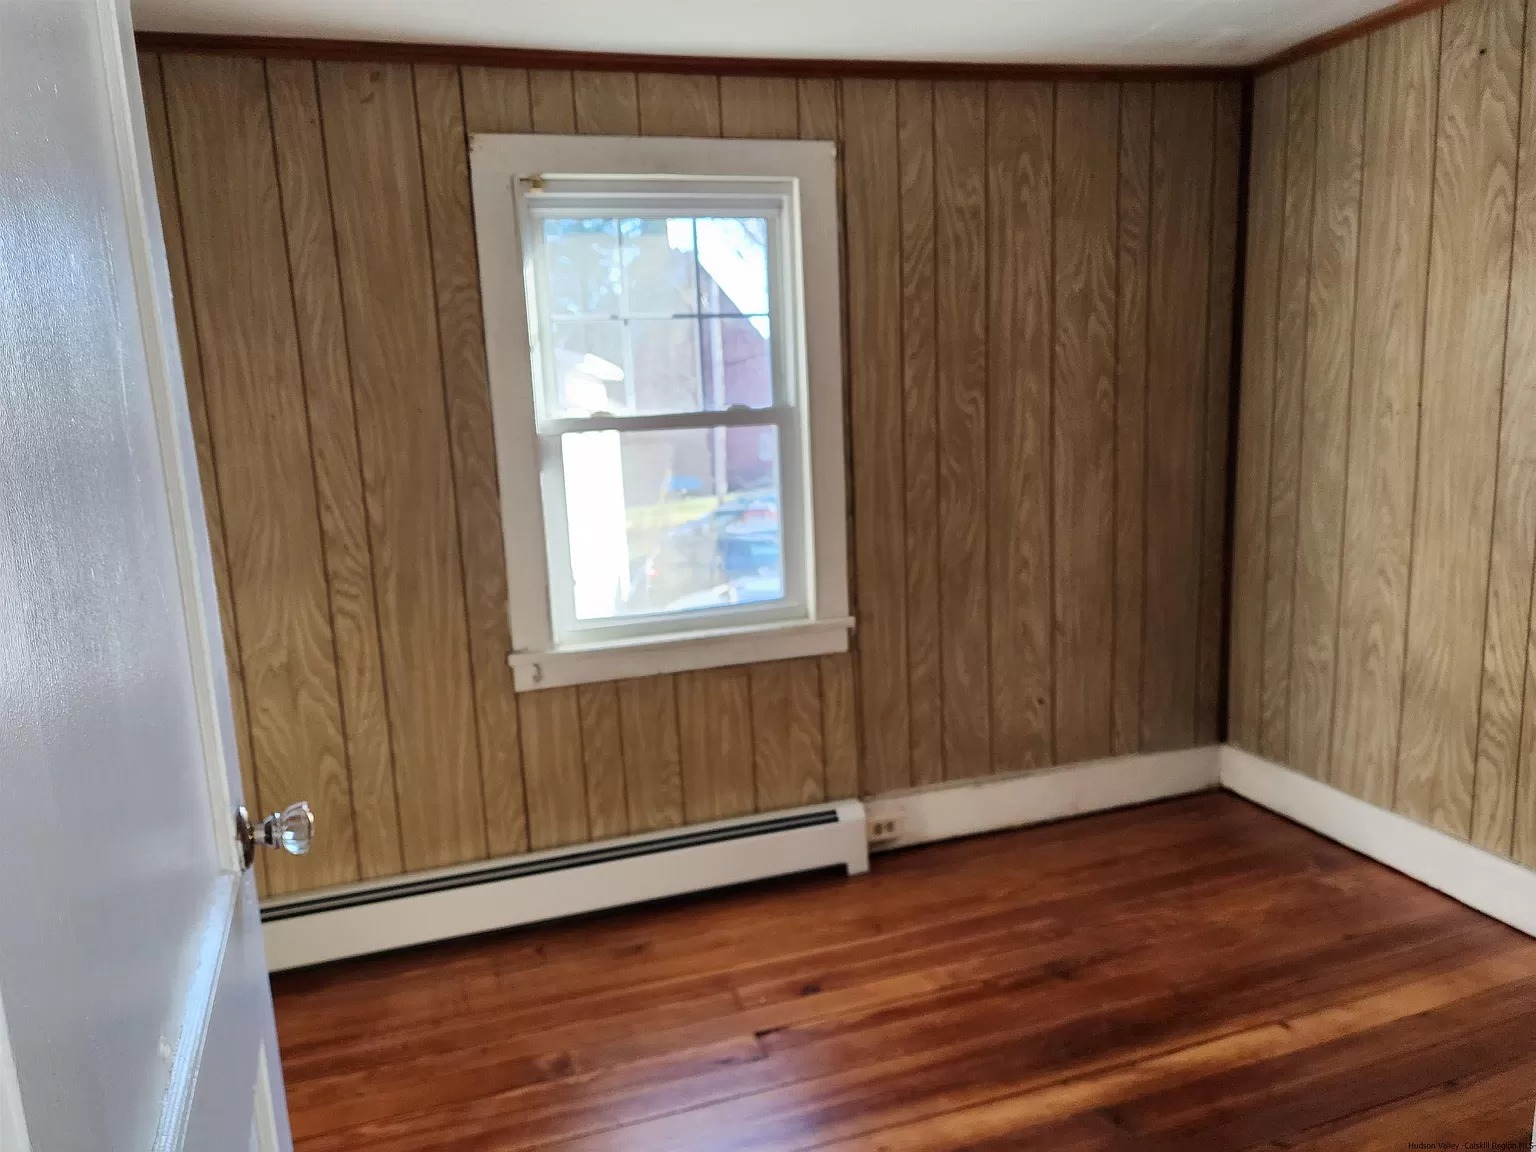 Aged faux wood paneling in bedroom